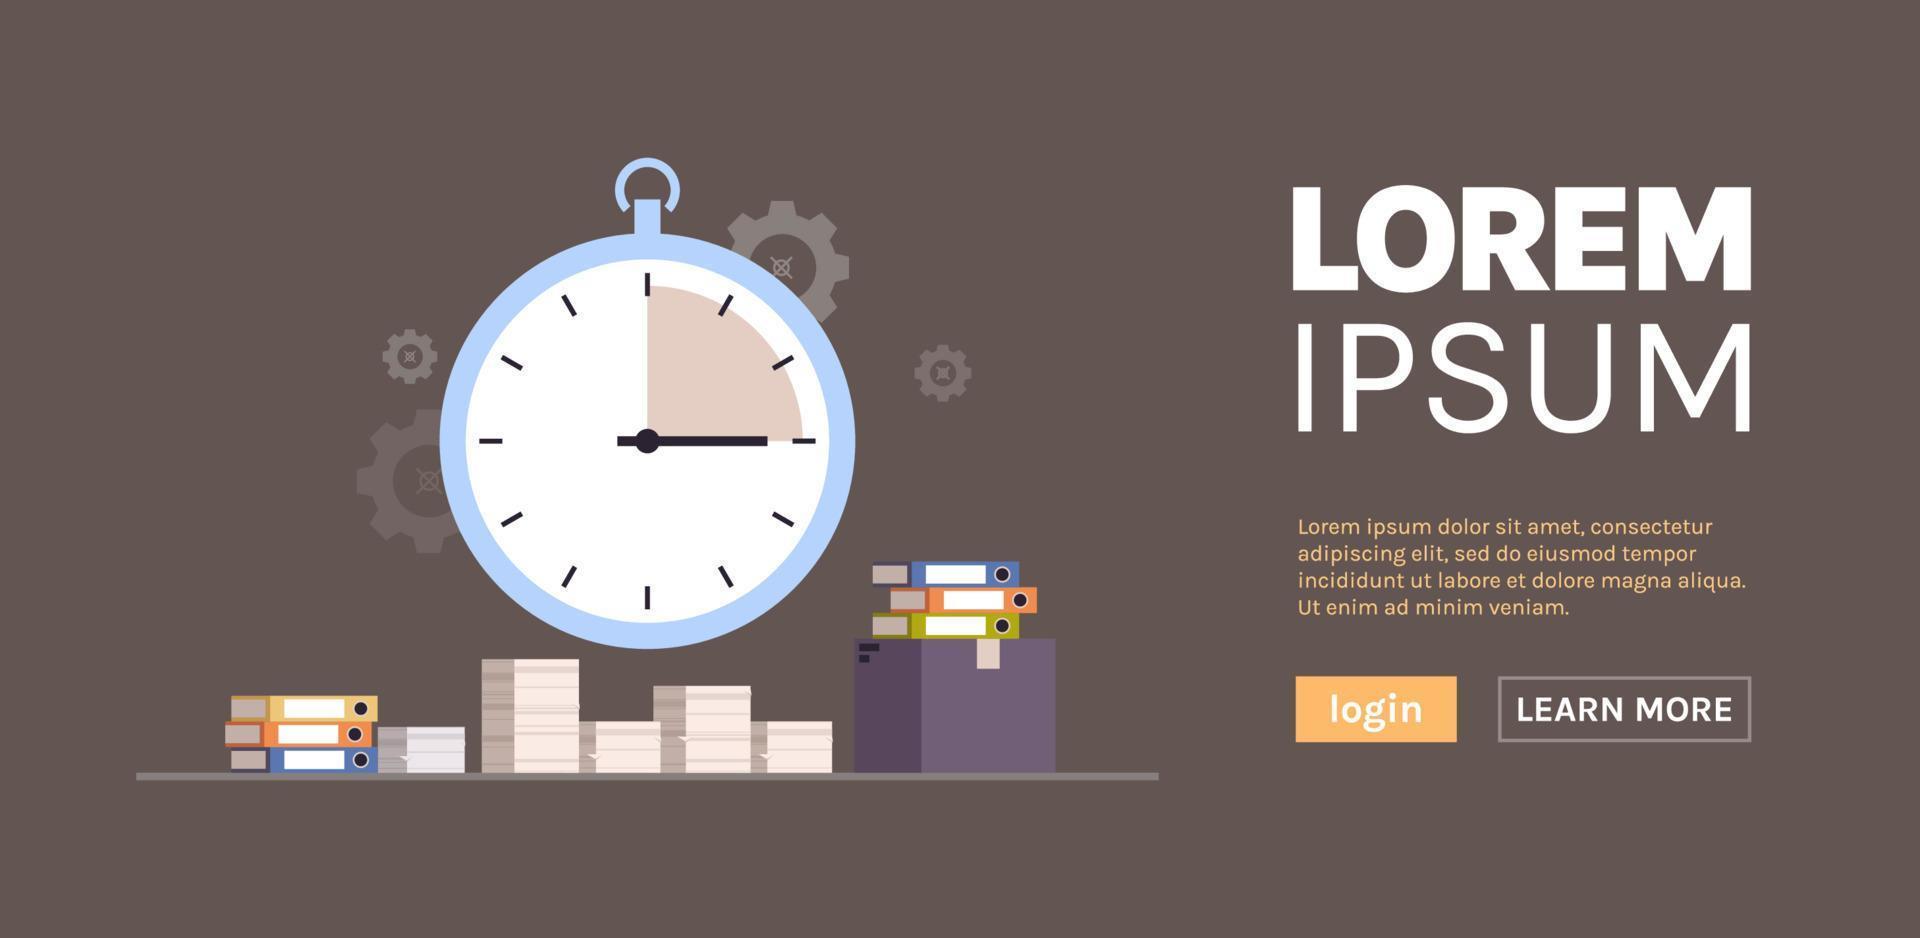 Stopwatch running in office hurry at work deadline time management concept flat vector illustration.